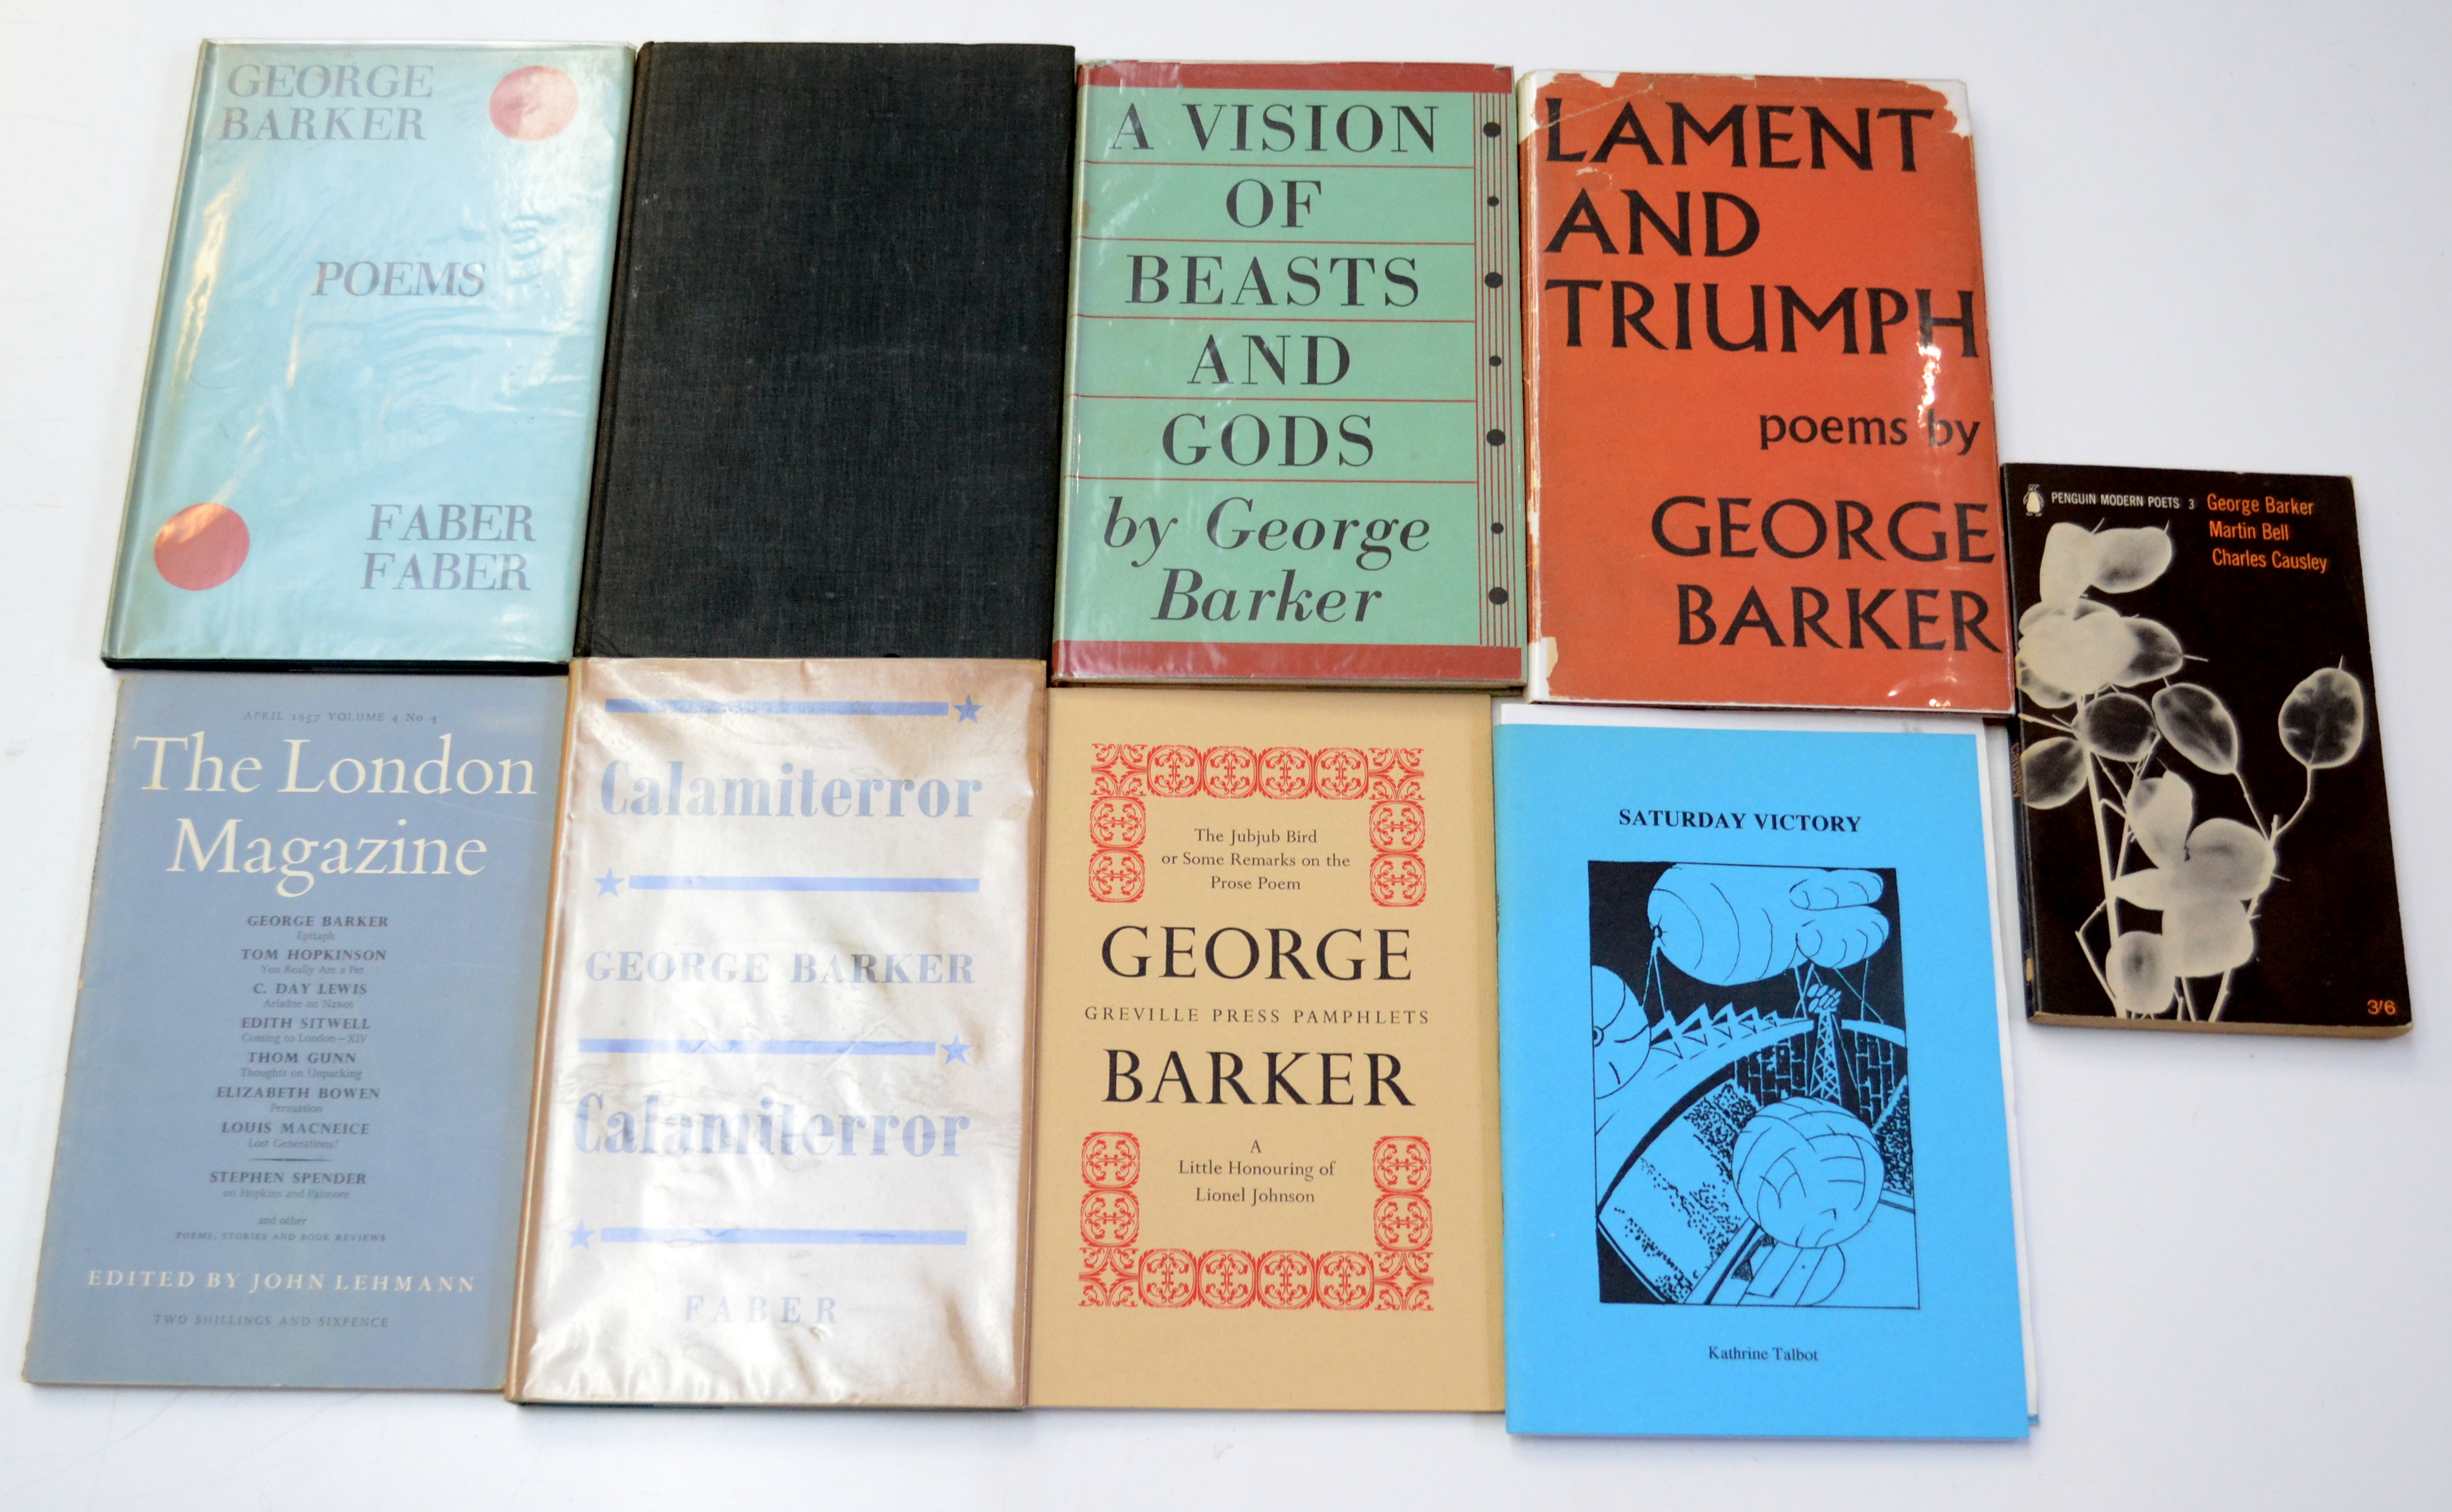 George BARKER (1913-1991) A collection of publications including Poems, Vision of Beasts and Gods,